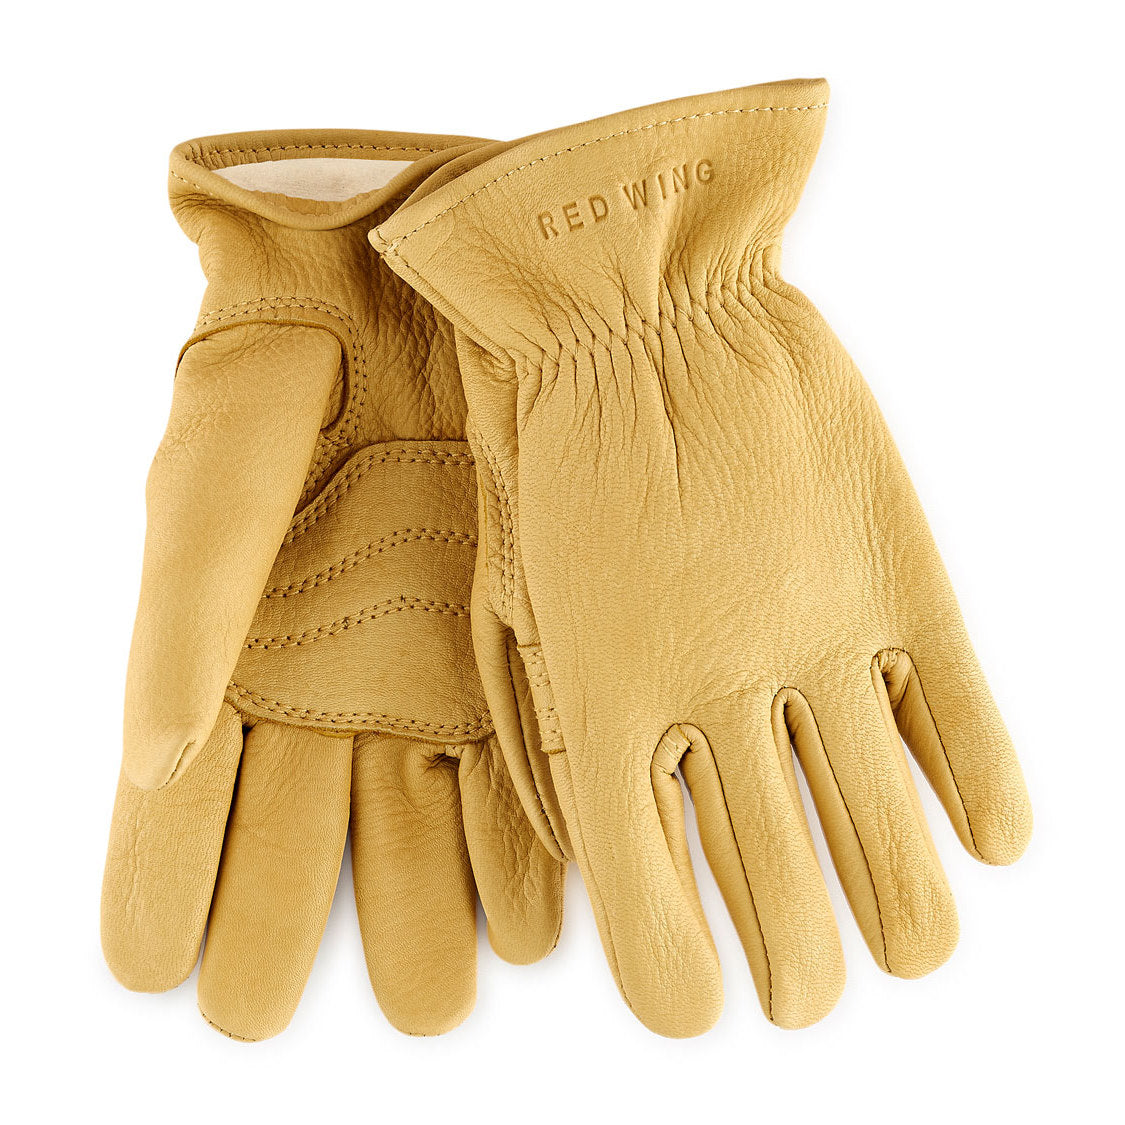 Red Wing Deerskin Lined Glove 95232 - Yellow